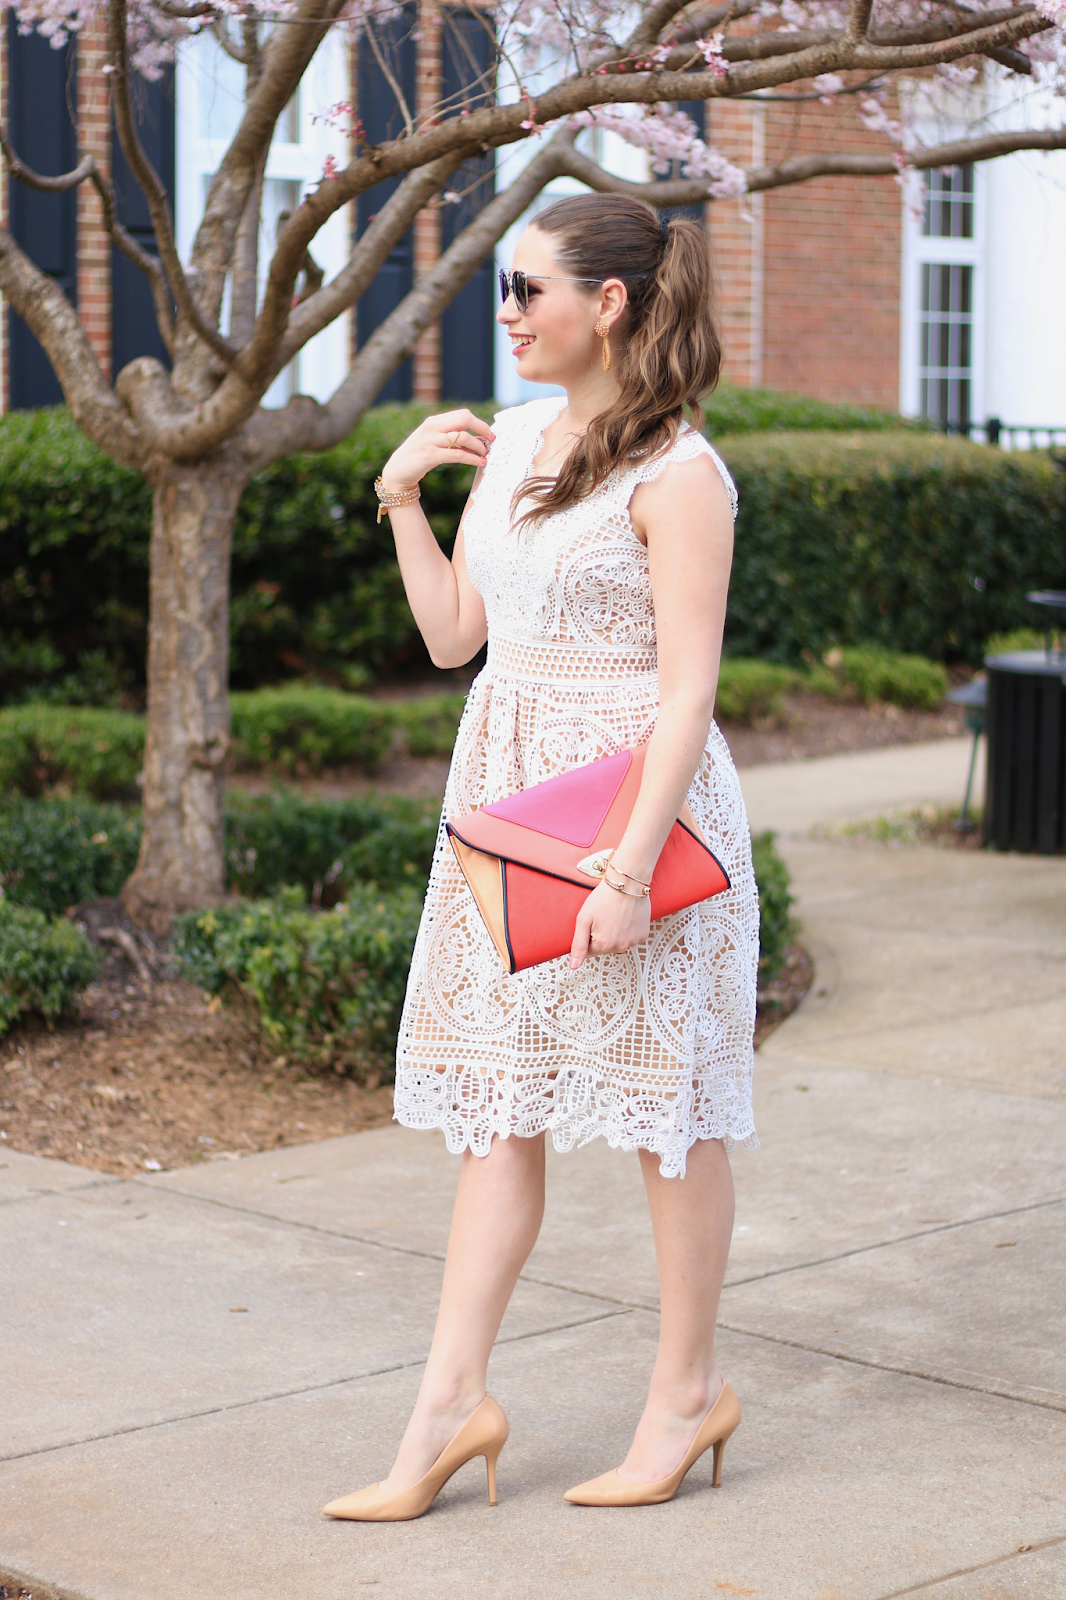 My Favorite Time of Year + White Lace Dress. | Southern Belle in Training